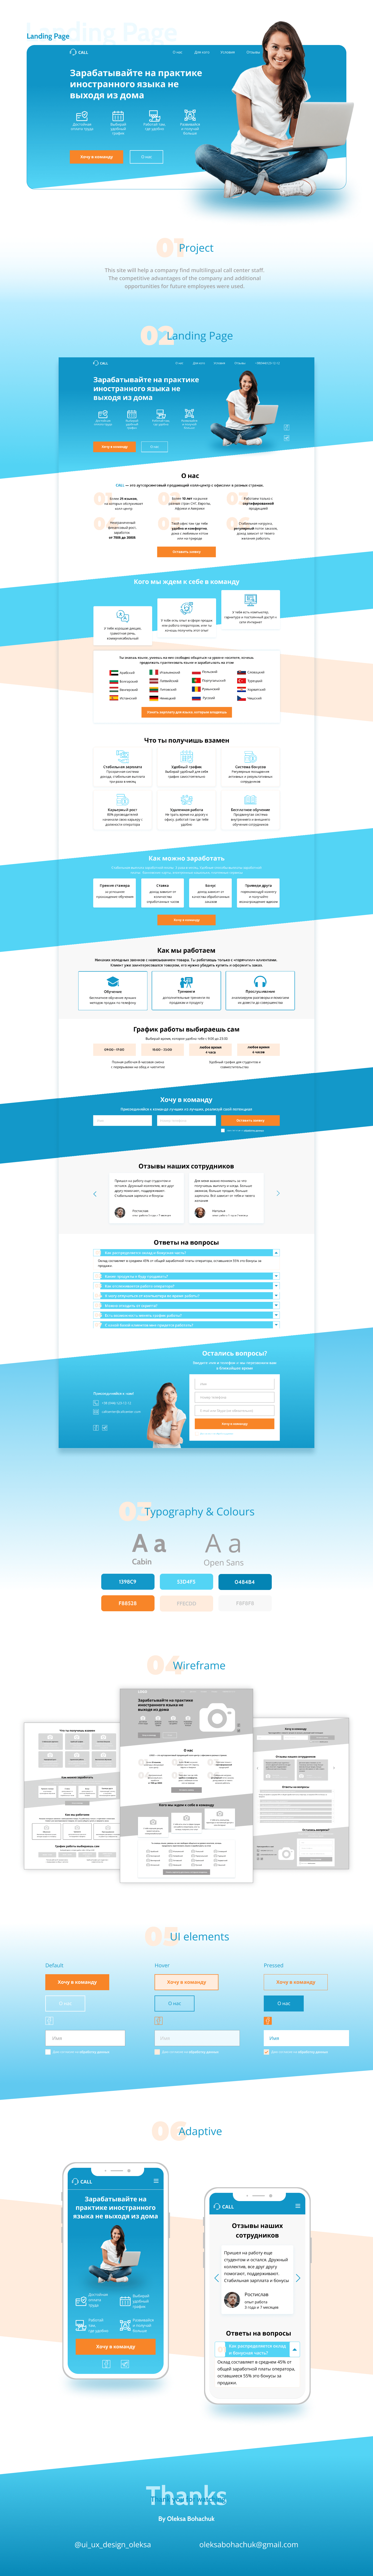 business call center customer service landing page operator support telemarketing Web Design 